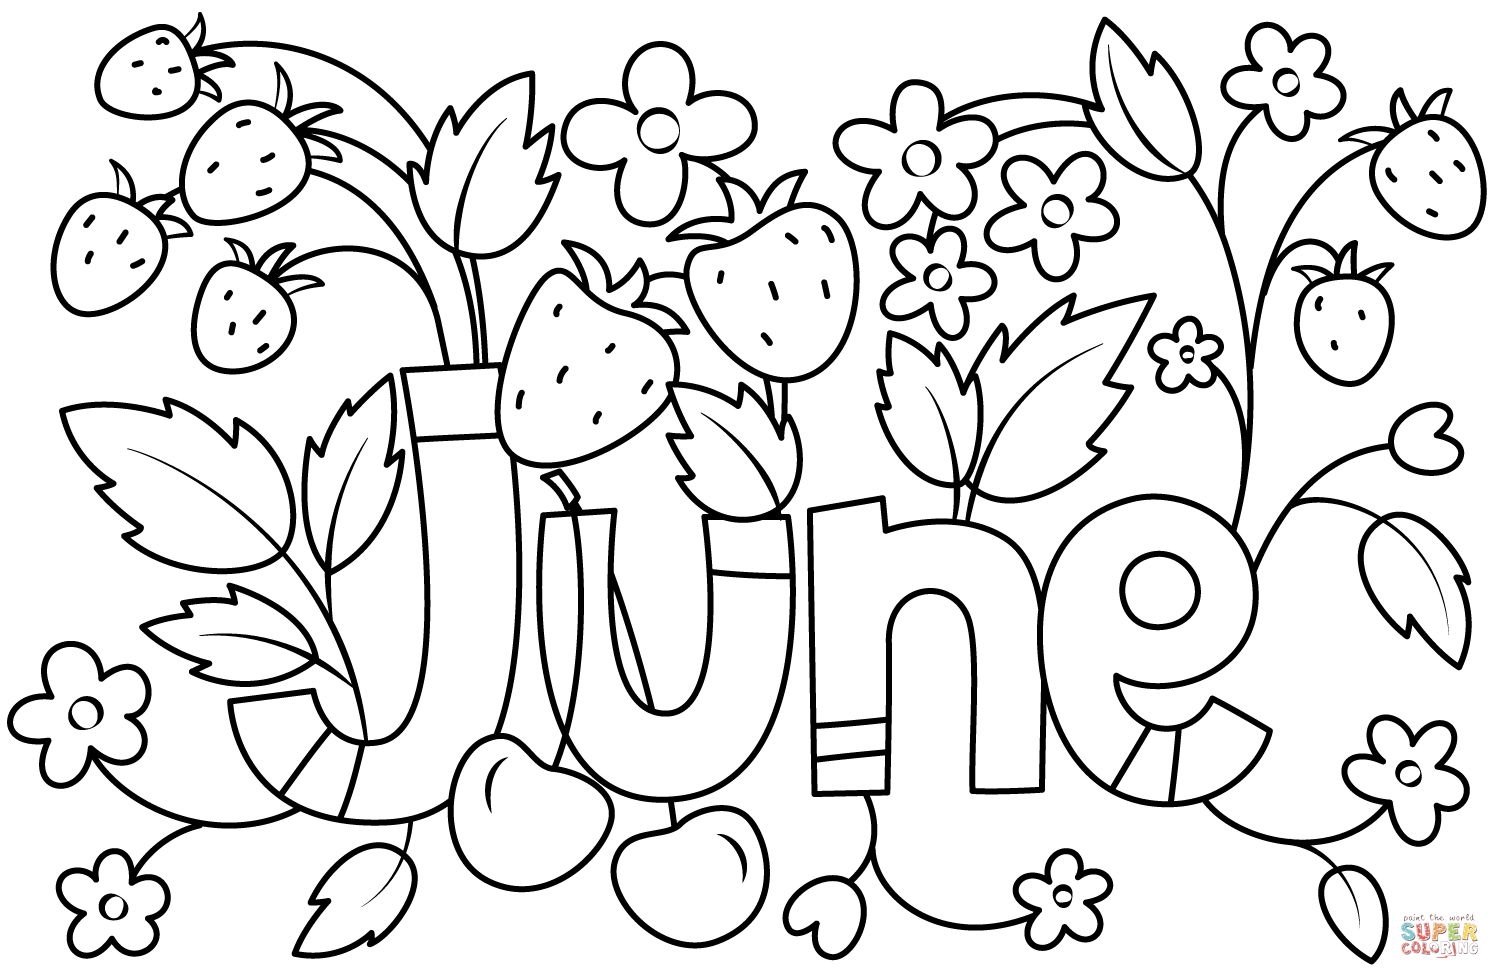 June coloring page free printable coloring pages summer coloring pages coloring pages for kids love coloring pages